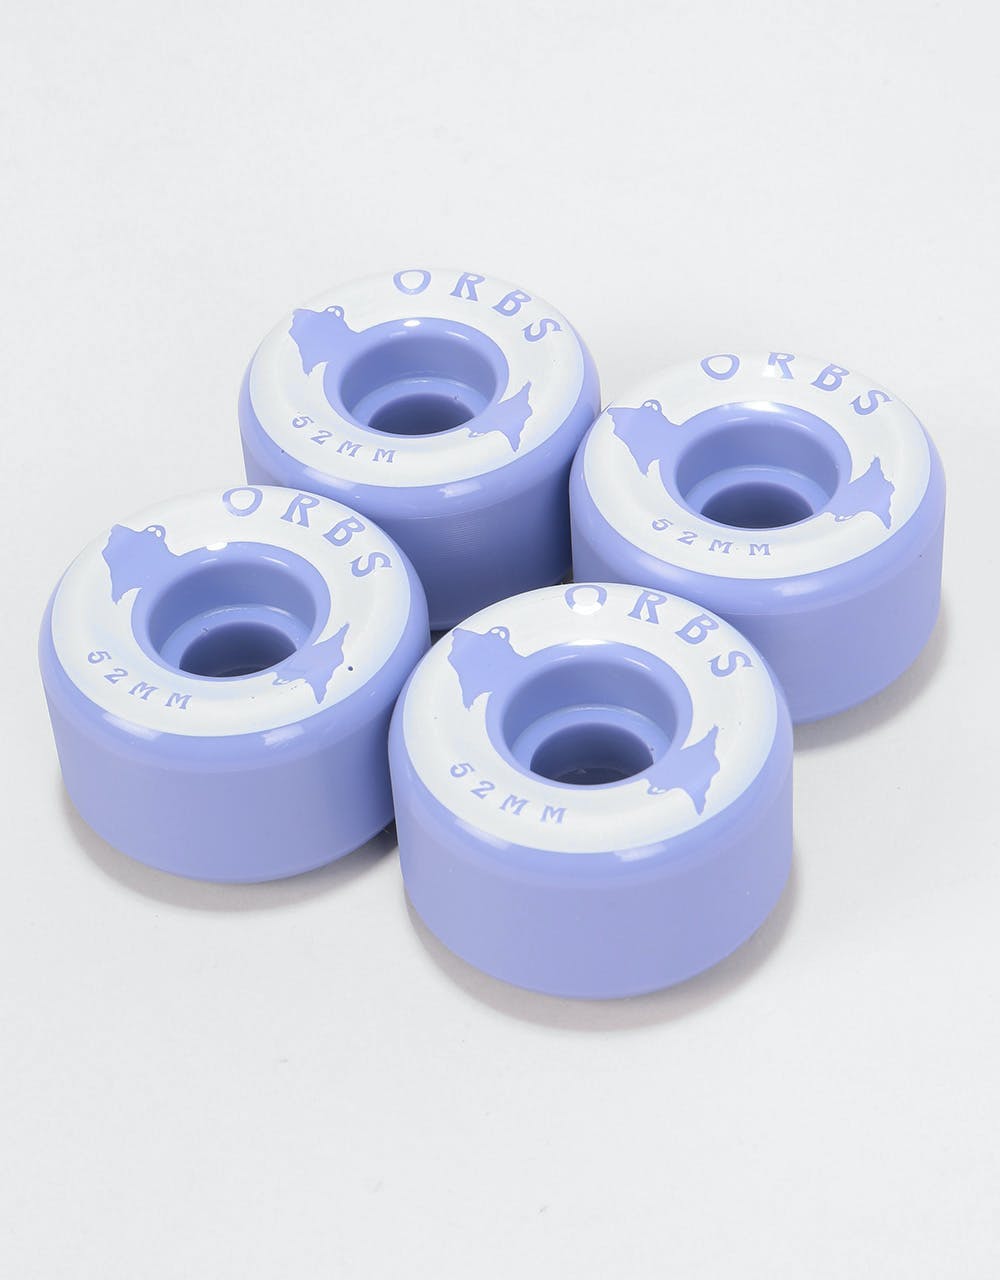 Orbs Specters Solids Conical 99a Skateboard Wheel - 52mm